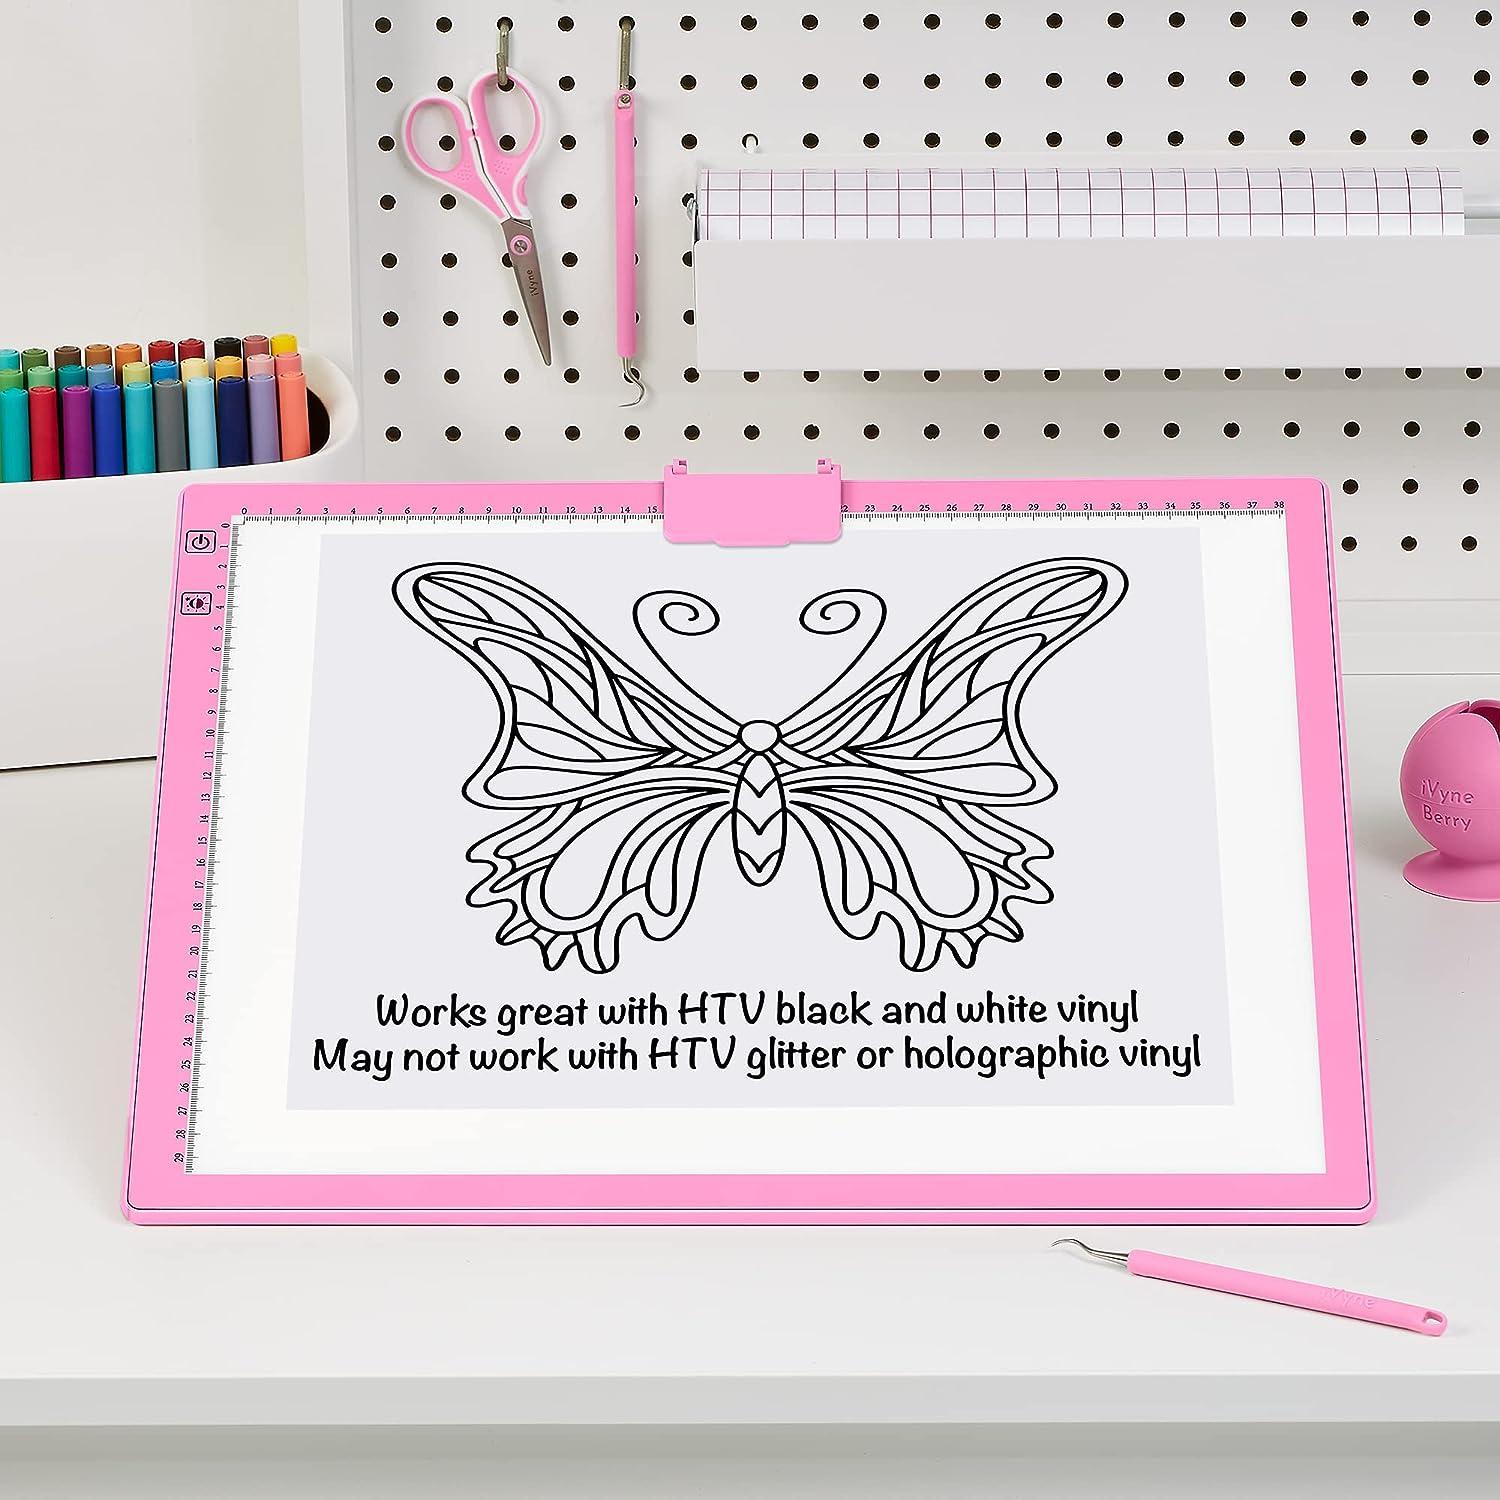 iVyne Rechargeable Led Bright Ultra-Thin Light Pad A3 Powered by Lithium  Battery for Cricut Vinyl, Weeding Tool, Drawing Crafting Box/Board for